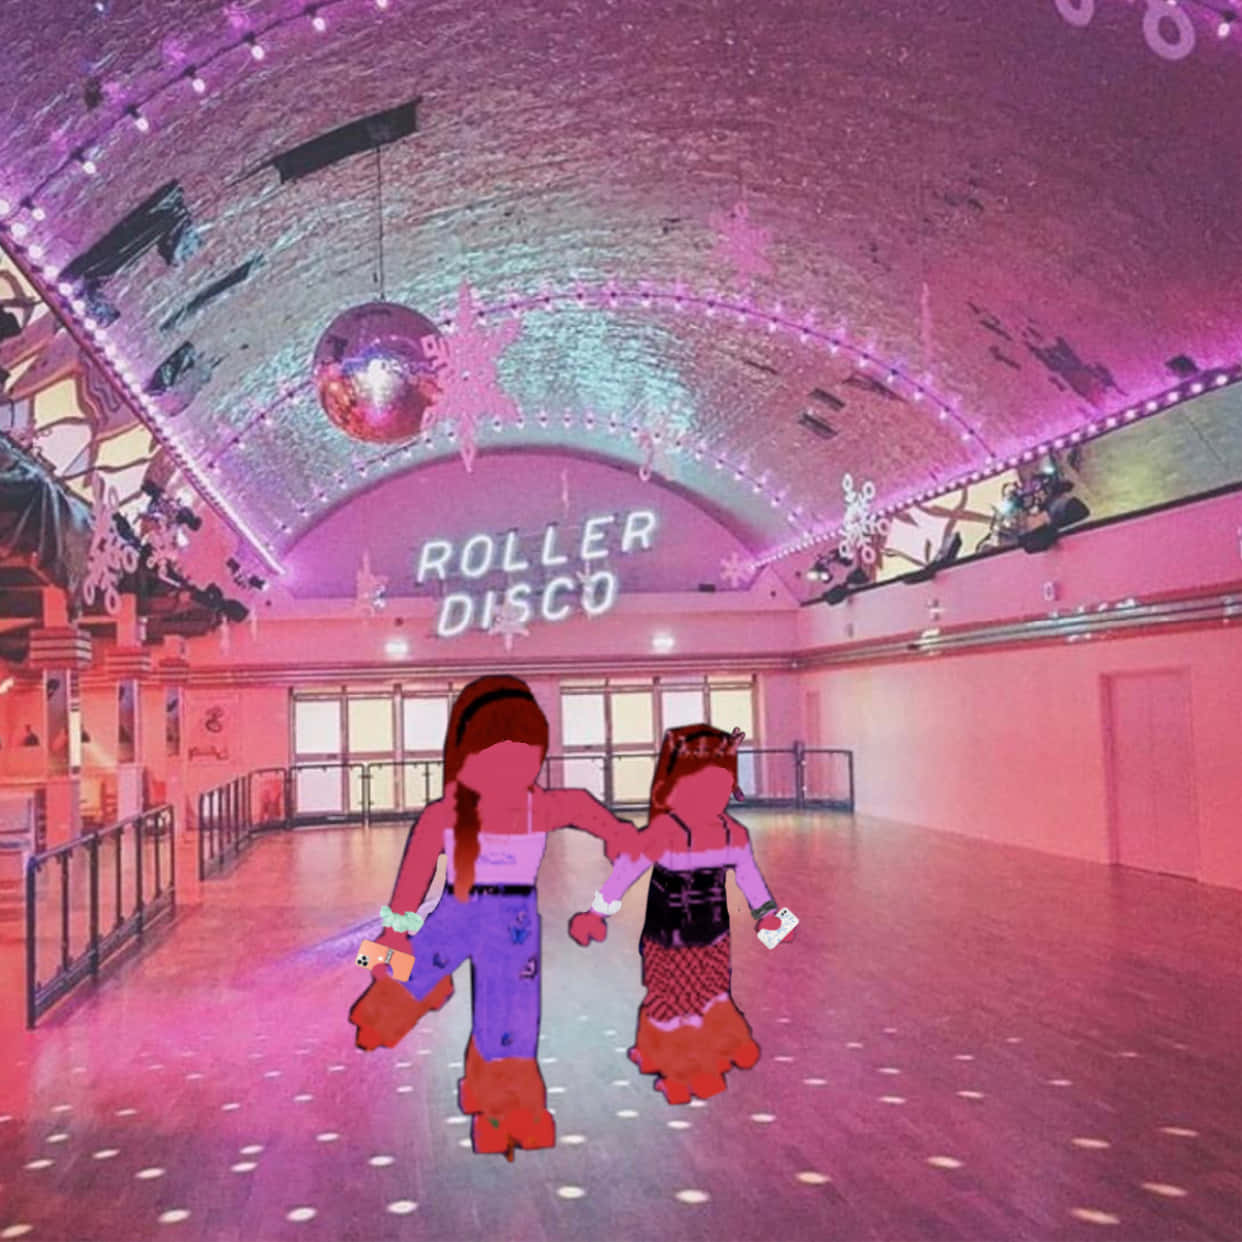 Two Girls Standing In A Room With A Pink Ceiling